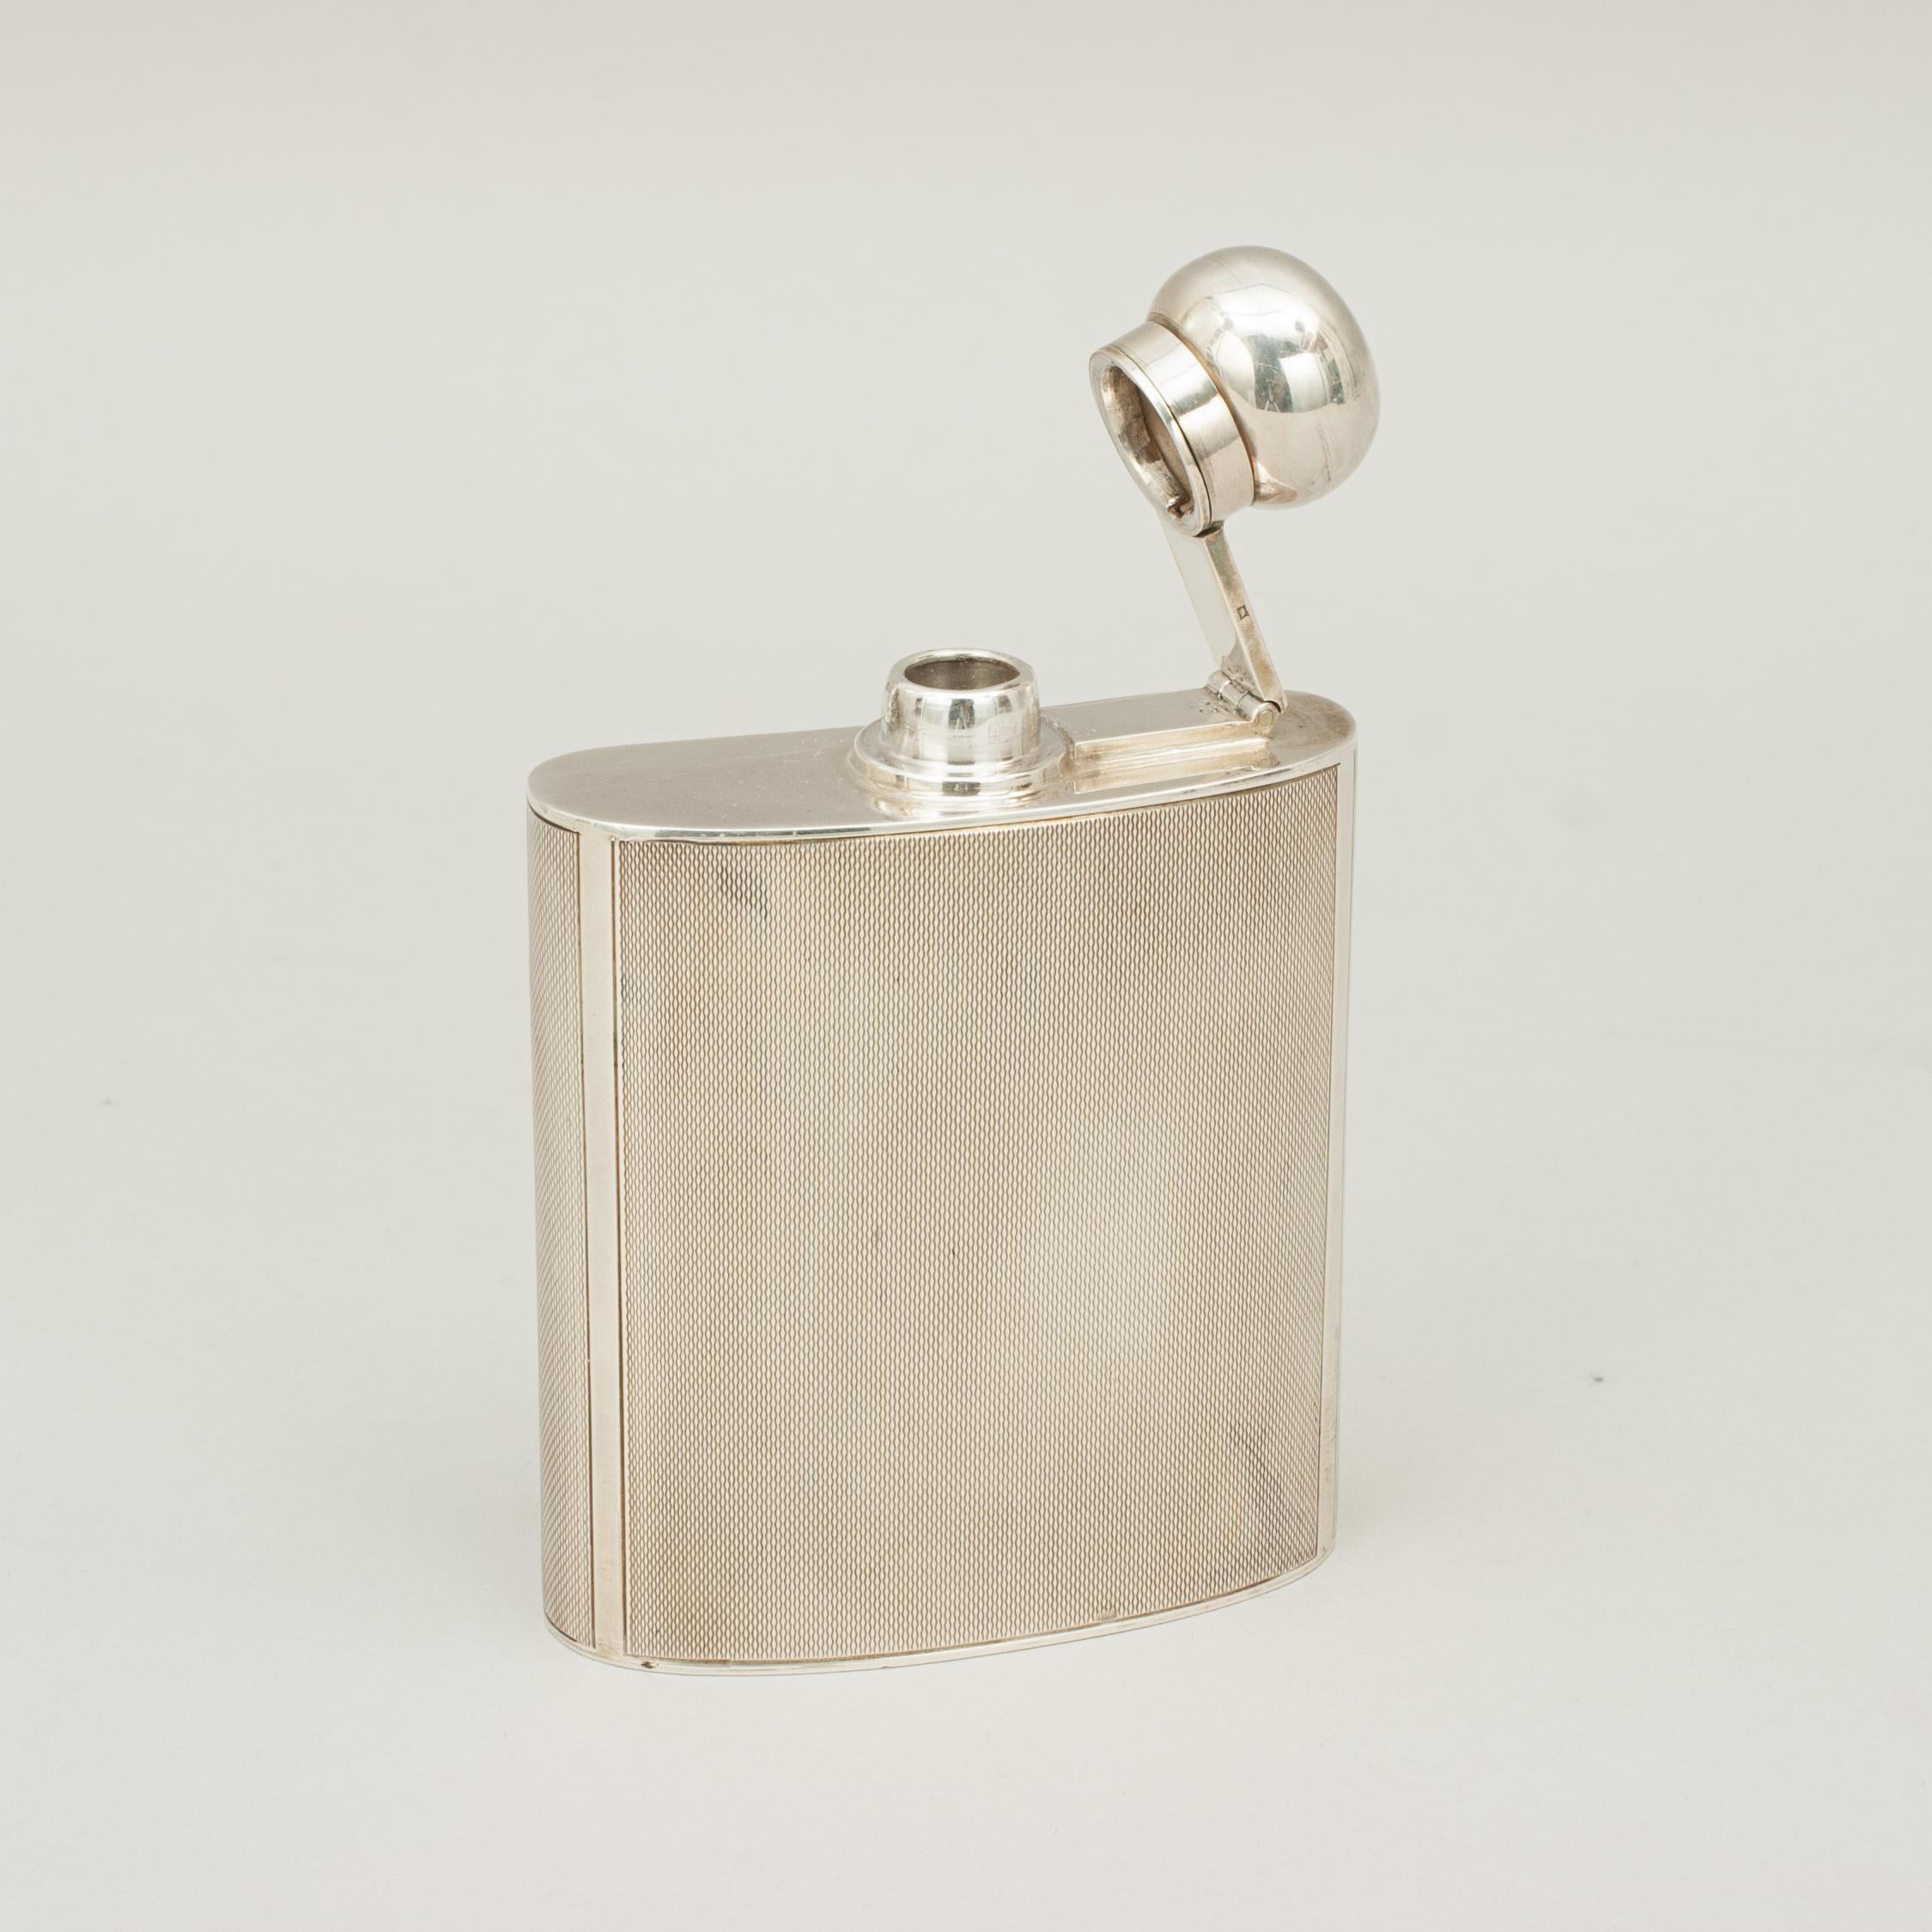 Art Deco style silver hip flask
A good shaped hip flask with hinged bayonet top. A beautiful piece with machined finish. Hallmarked Birmingham 1963 with makers initials J.G Ltd. (Joseph Gloster Ltd.1908-1978, Lion Silver Works, Hockley Hill,